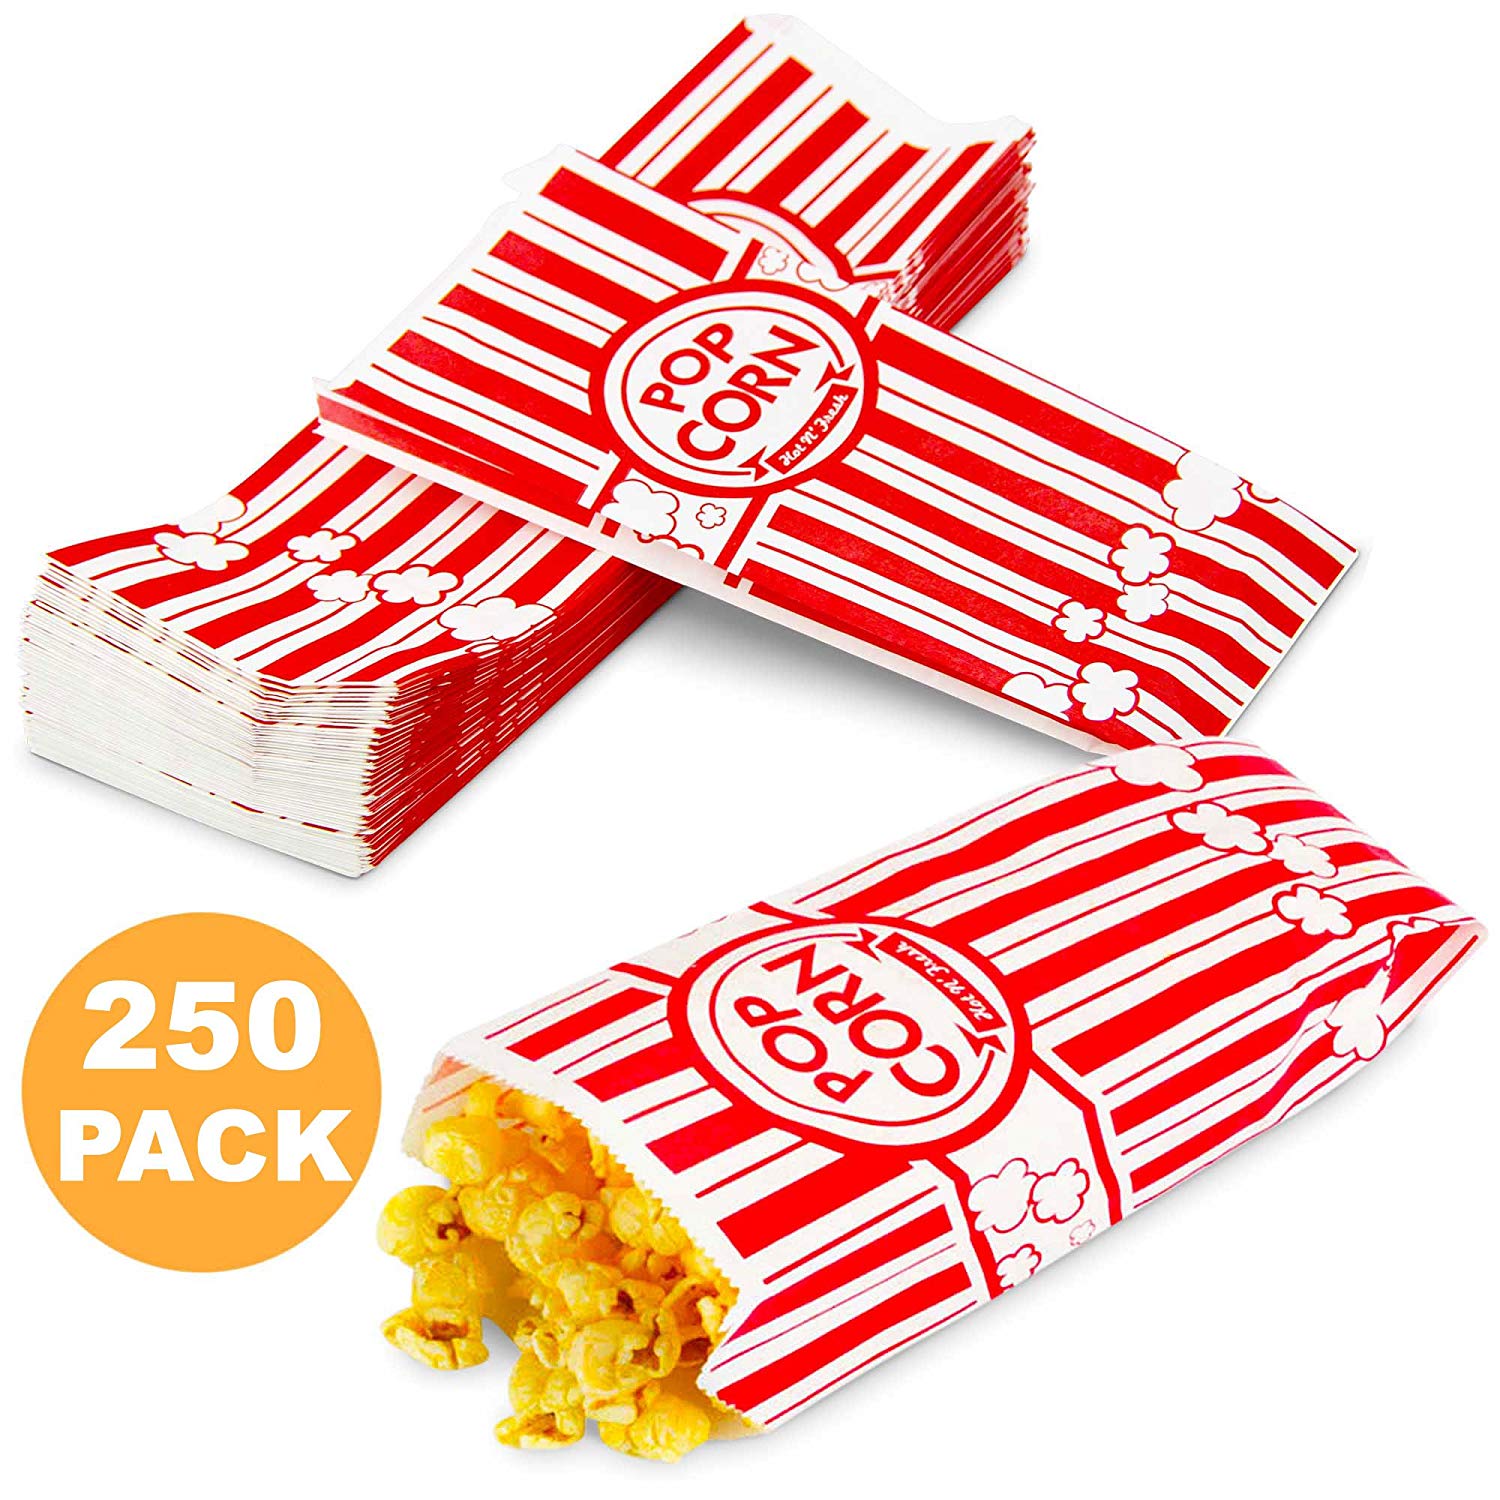 ZOOYOO Gold Popcorn Boxes Mini Paper Popcorn Containers for Party,Pack of 15 